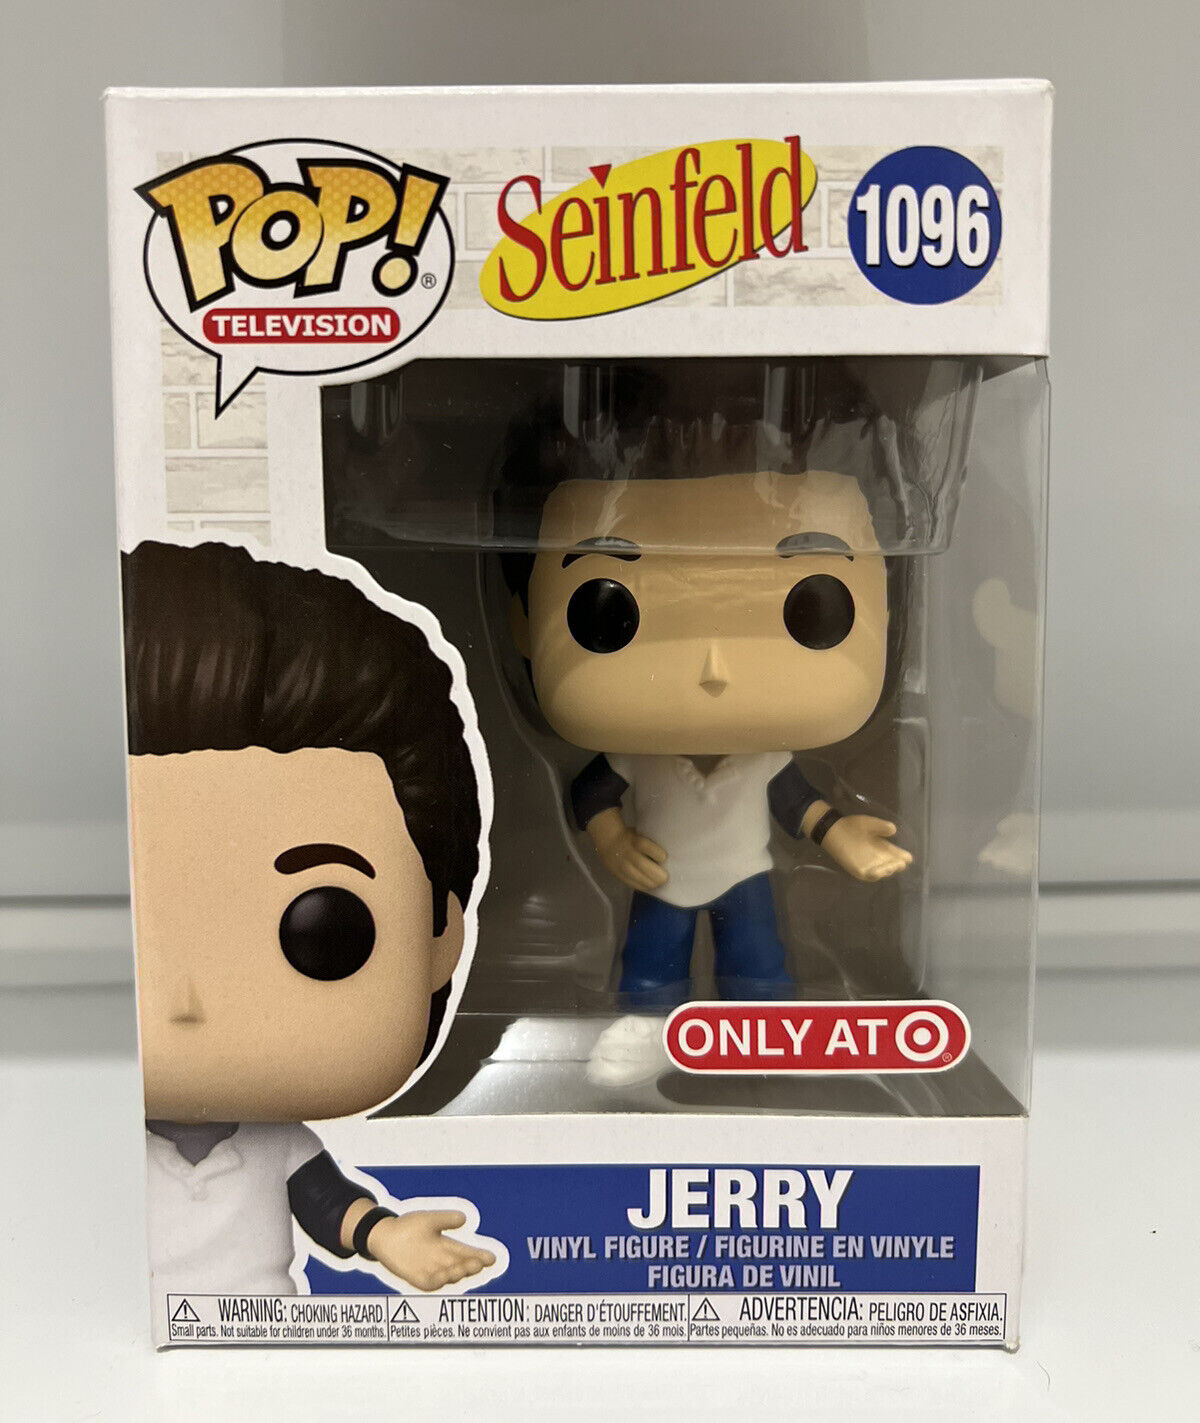 Funko Pop Television Jerry Seinfeld #1096 Vinyl Figure Only at Target